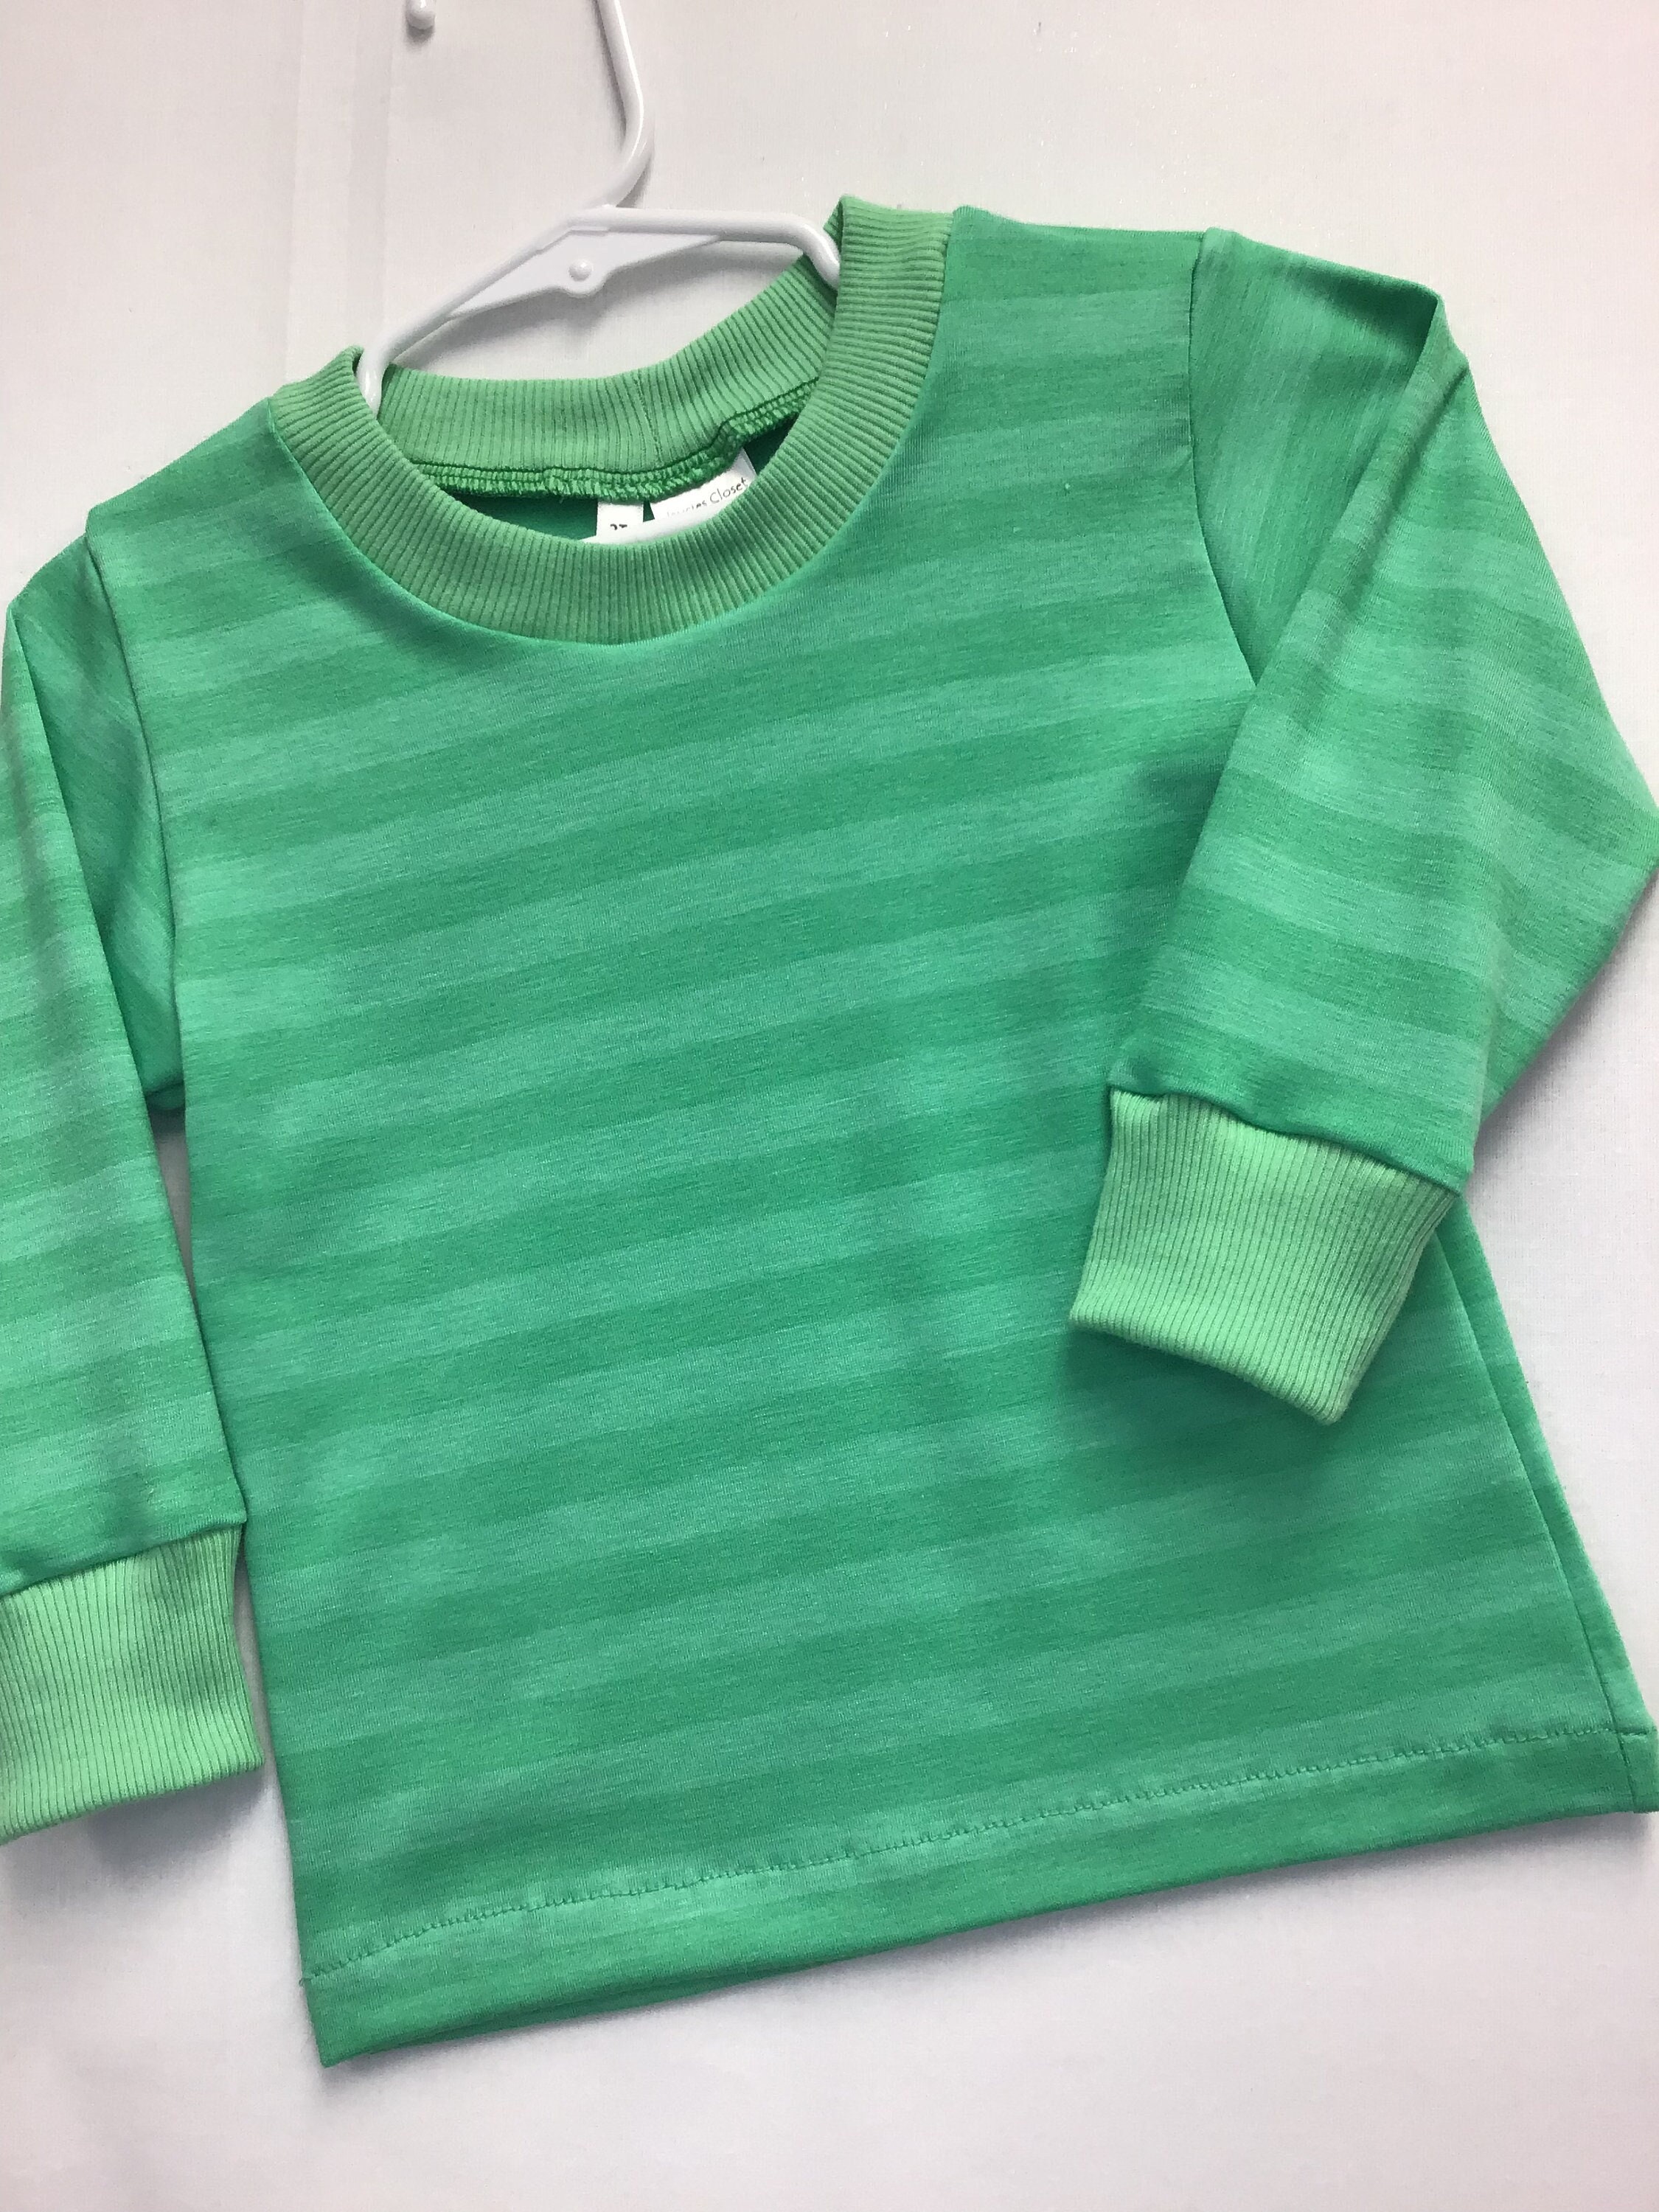 Tone T-shirt, Two Etsy and Green, - Baby Toddler Striped